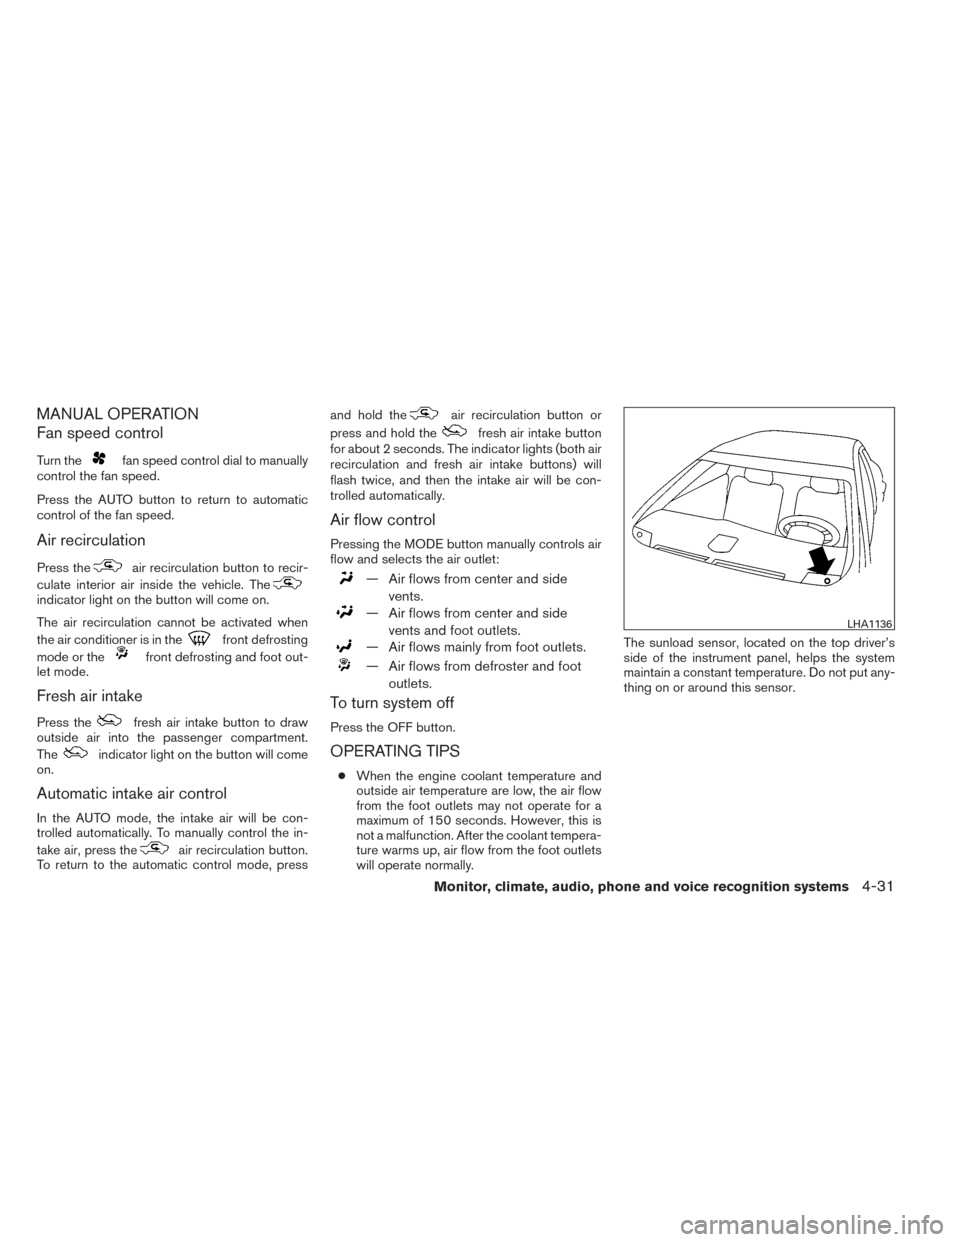 NISSAN MAXIMA 2014 A35 / 7.G User Guide MANUAL OPERATION
Fan speed control
Turn thefan speed control dial to manually
control the fan speed.
Press the AUTO button to return to automatic
control of the fan speed.
Air recirculation
Press thea